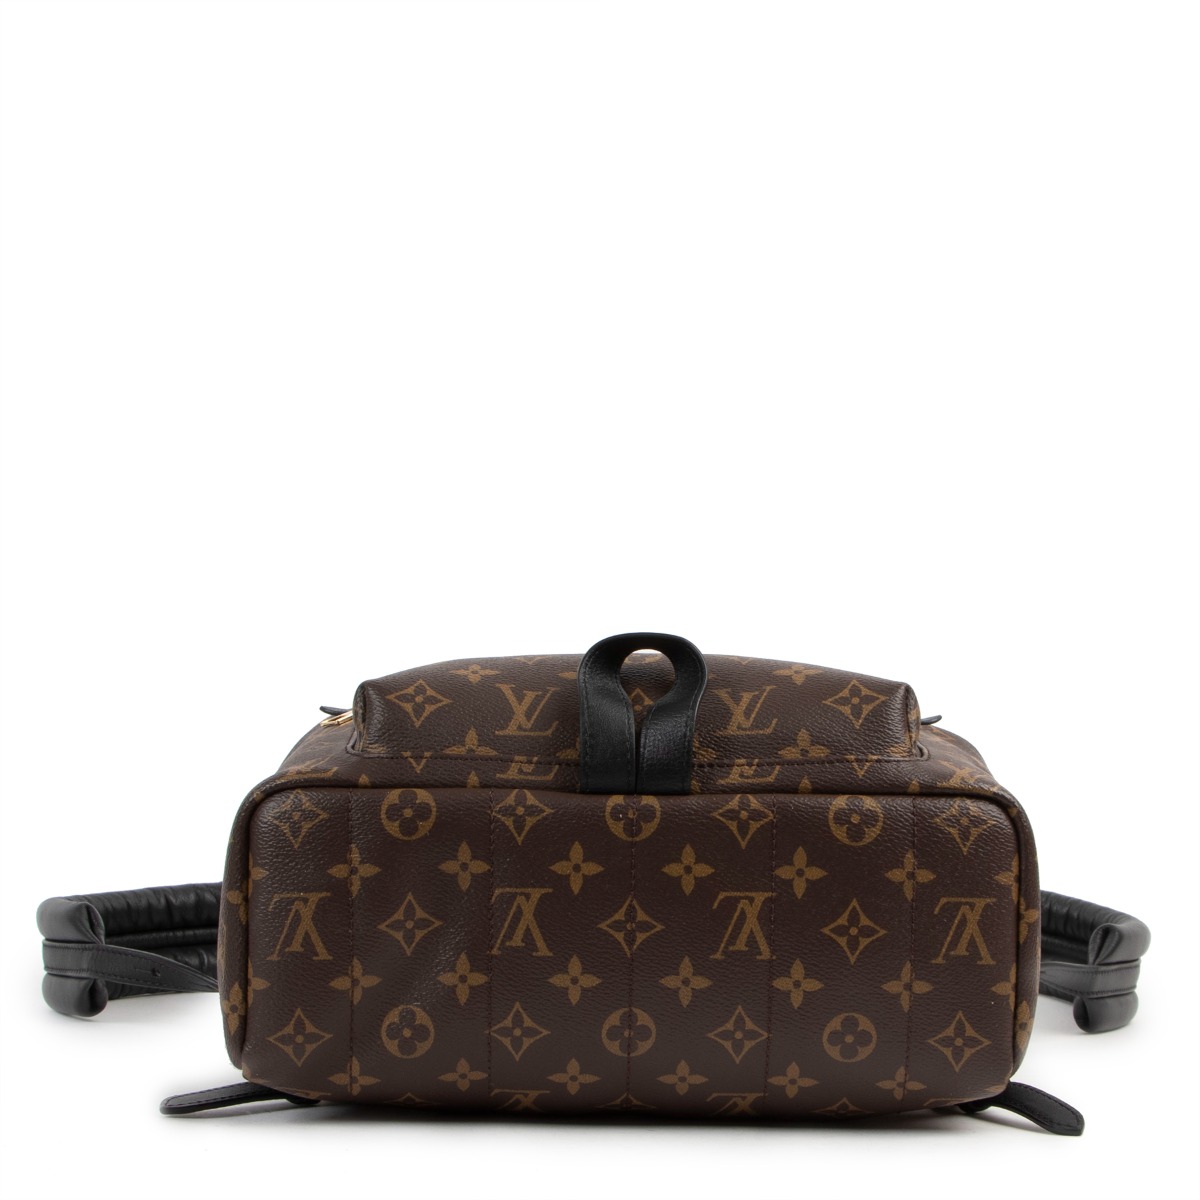 Louis Vuitton Palm Springs Backpack Limited Edition Monogram Canvas Mini at  1stDibs  louis vuitton backpack limited edition, maison fondee en 1854, lv  backpack limited edition